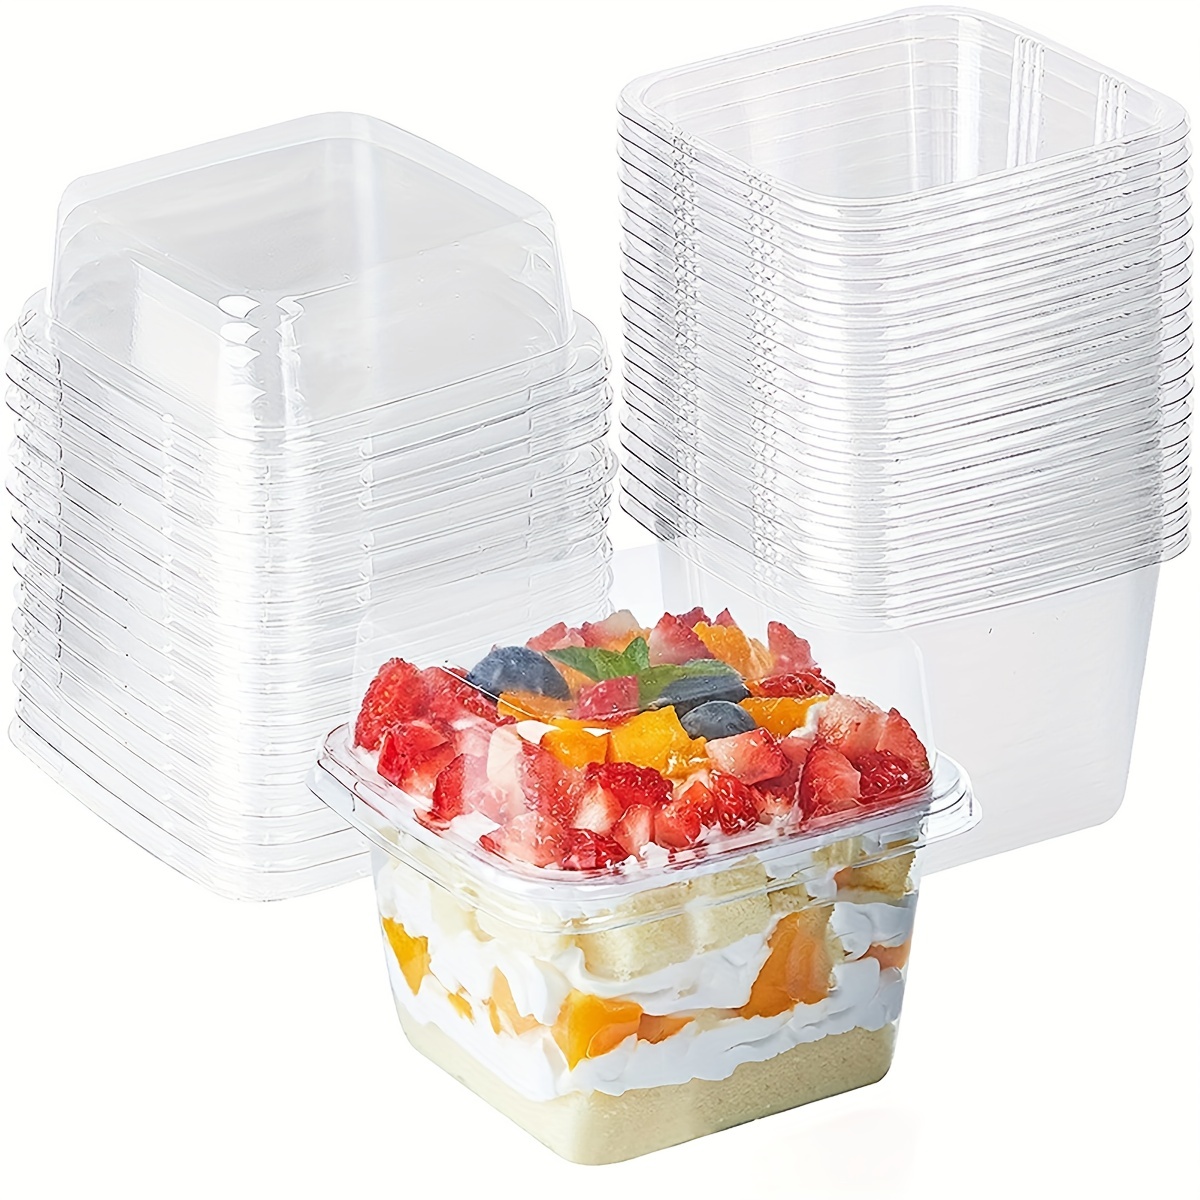 10pcs disposable lunch box cake box food storage containers puff